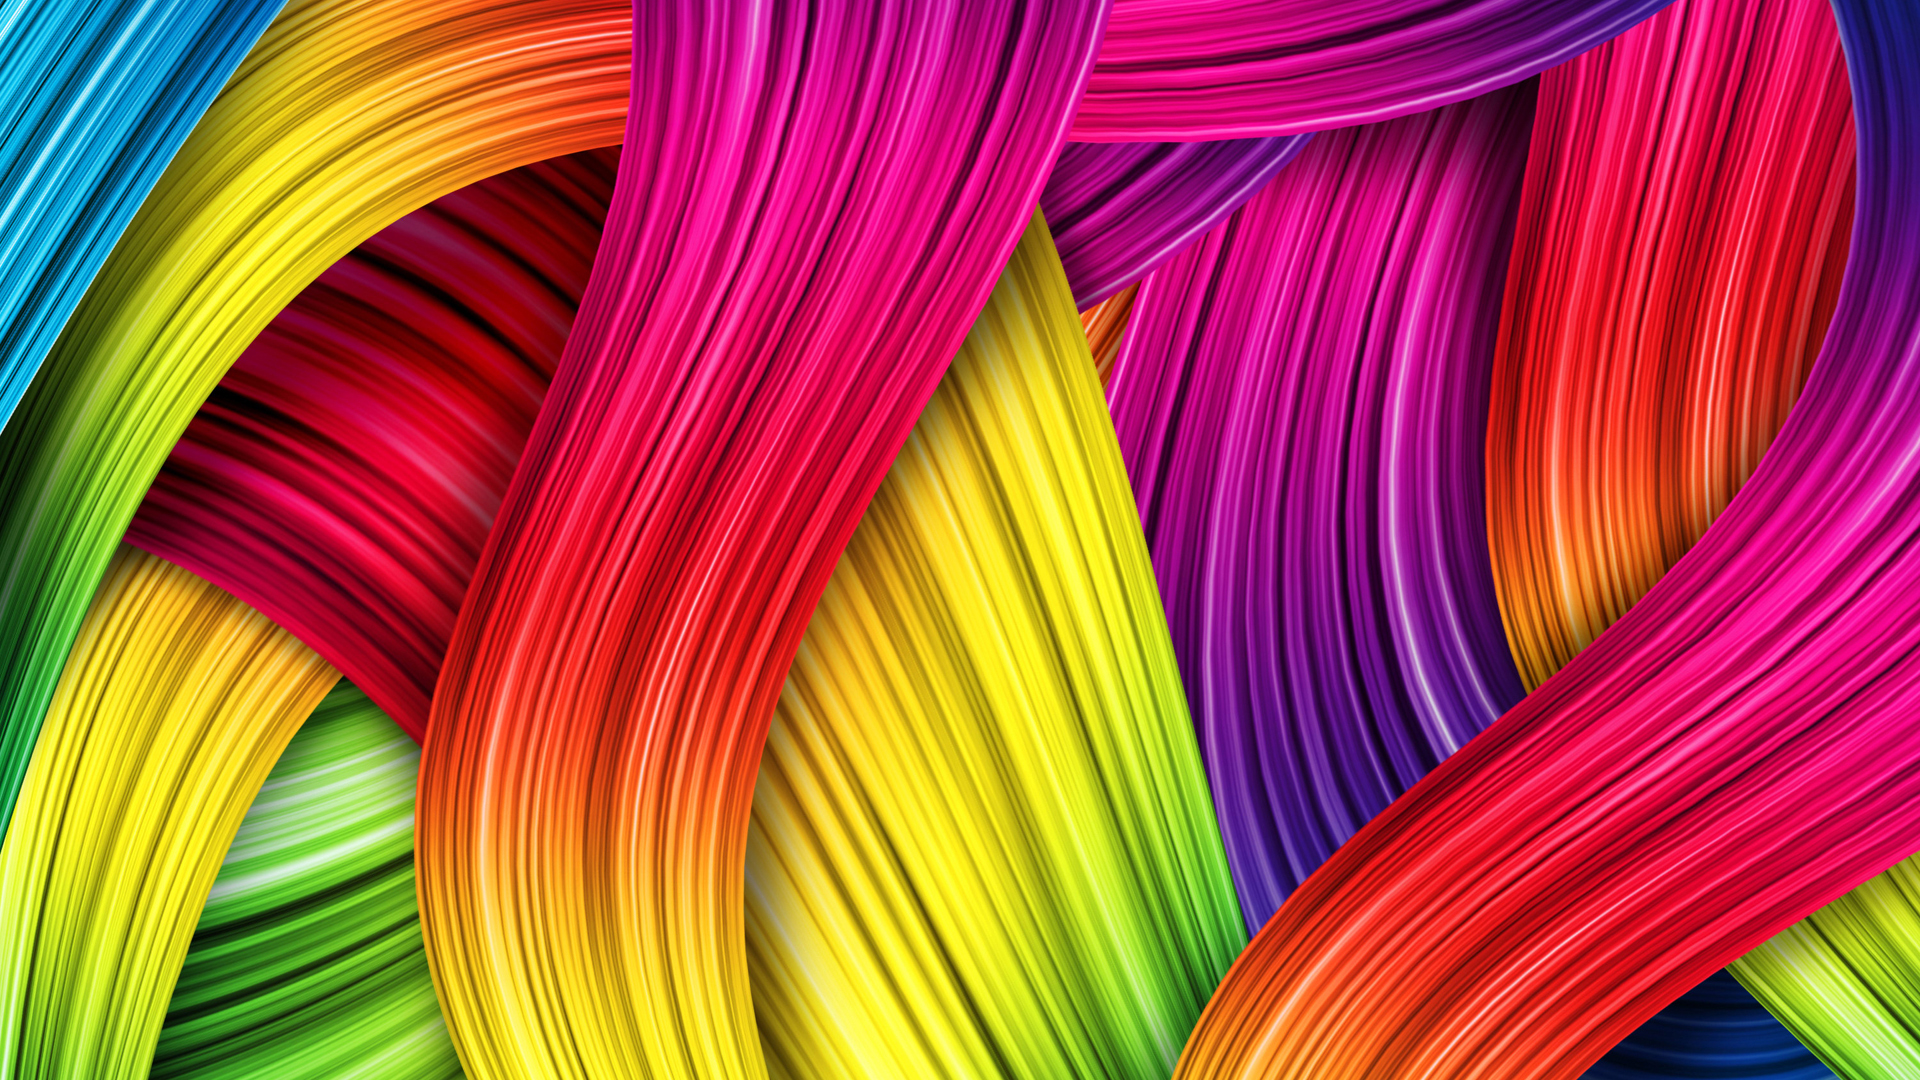 Colorful Abstract HD Desktop Wallpaper This For